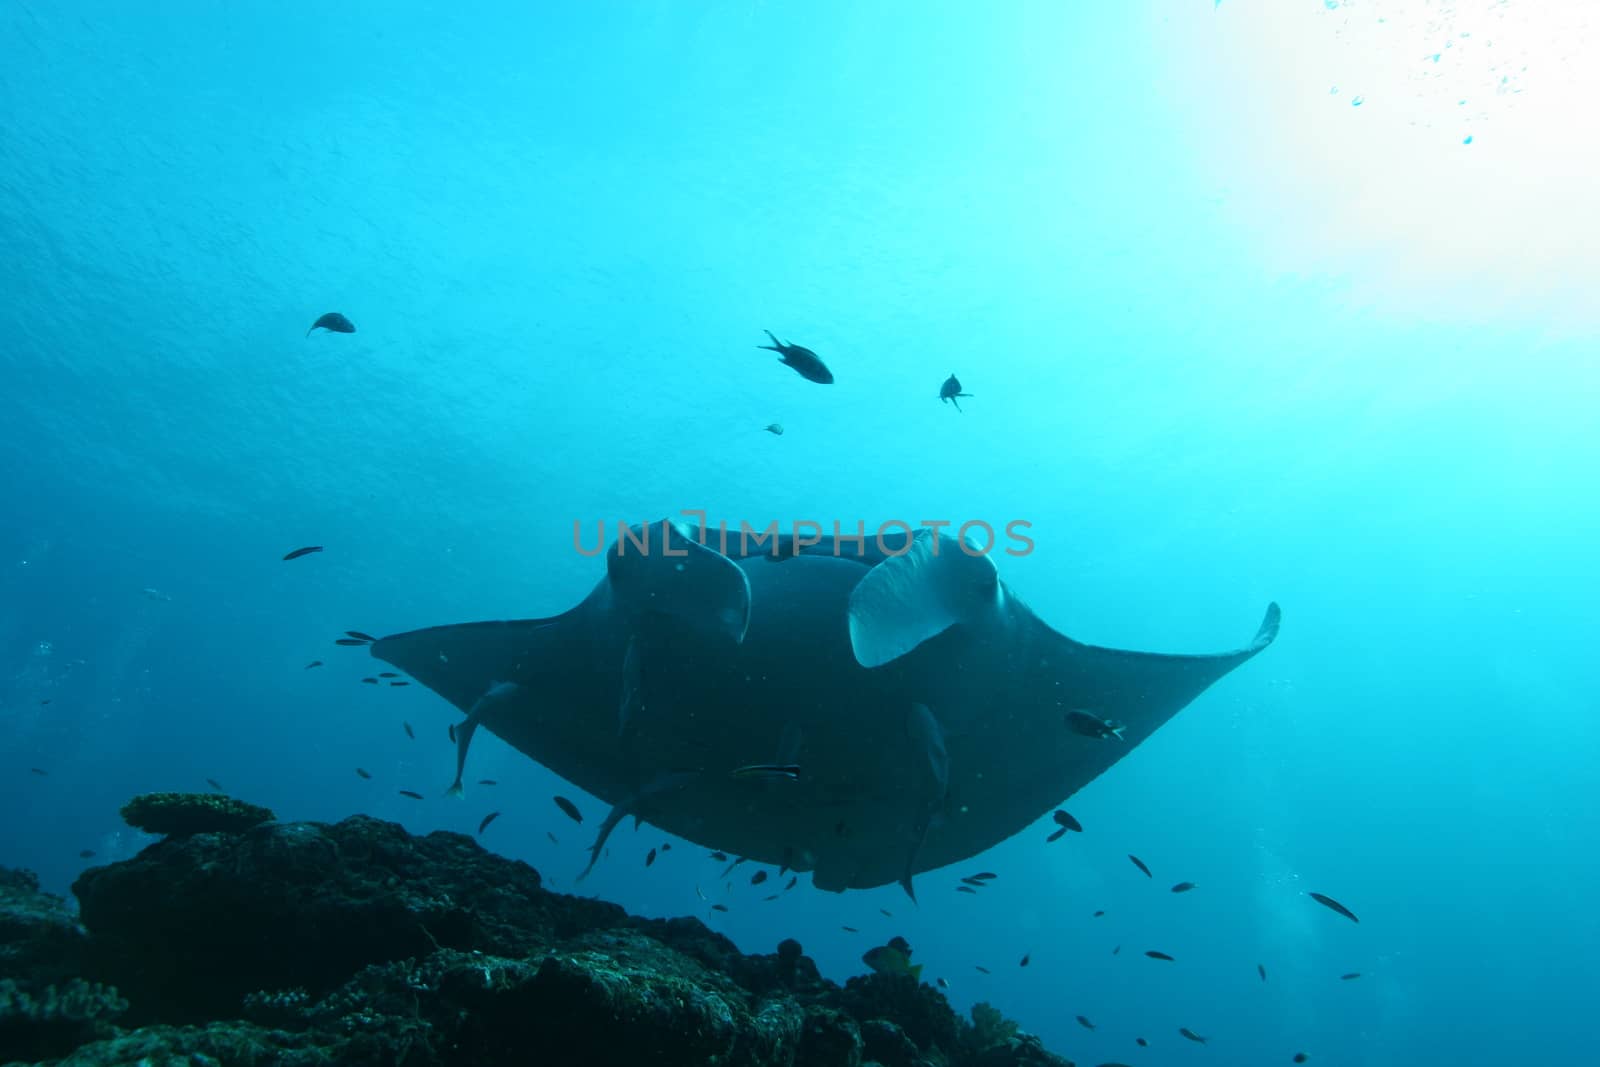 Manta Ray underwater diving photo Maldives Indian Ocean by desant7474